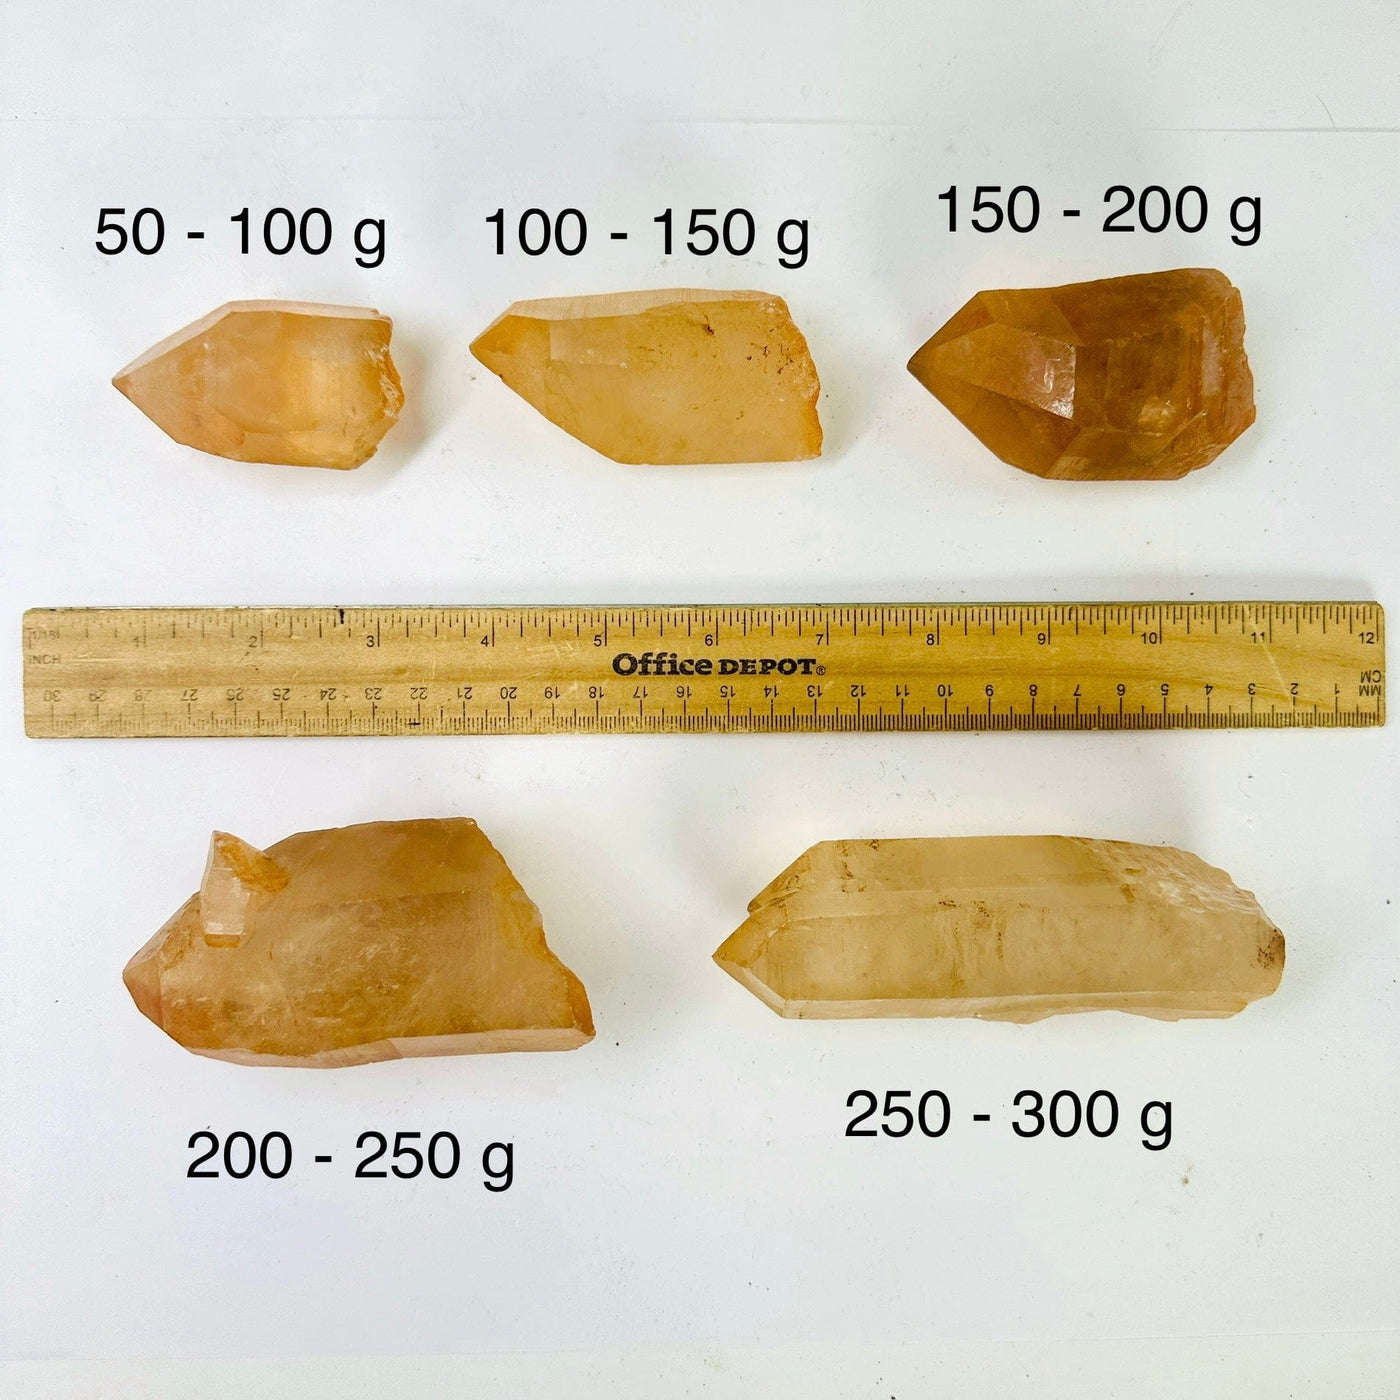  Lemurian Tangerine Quartz Point - High Quality - By Weight five quartz points of different weight categories next to ruler for size reference